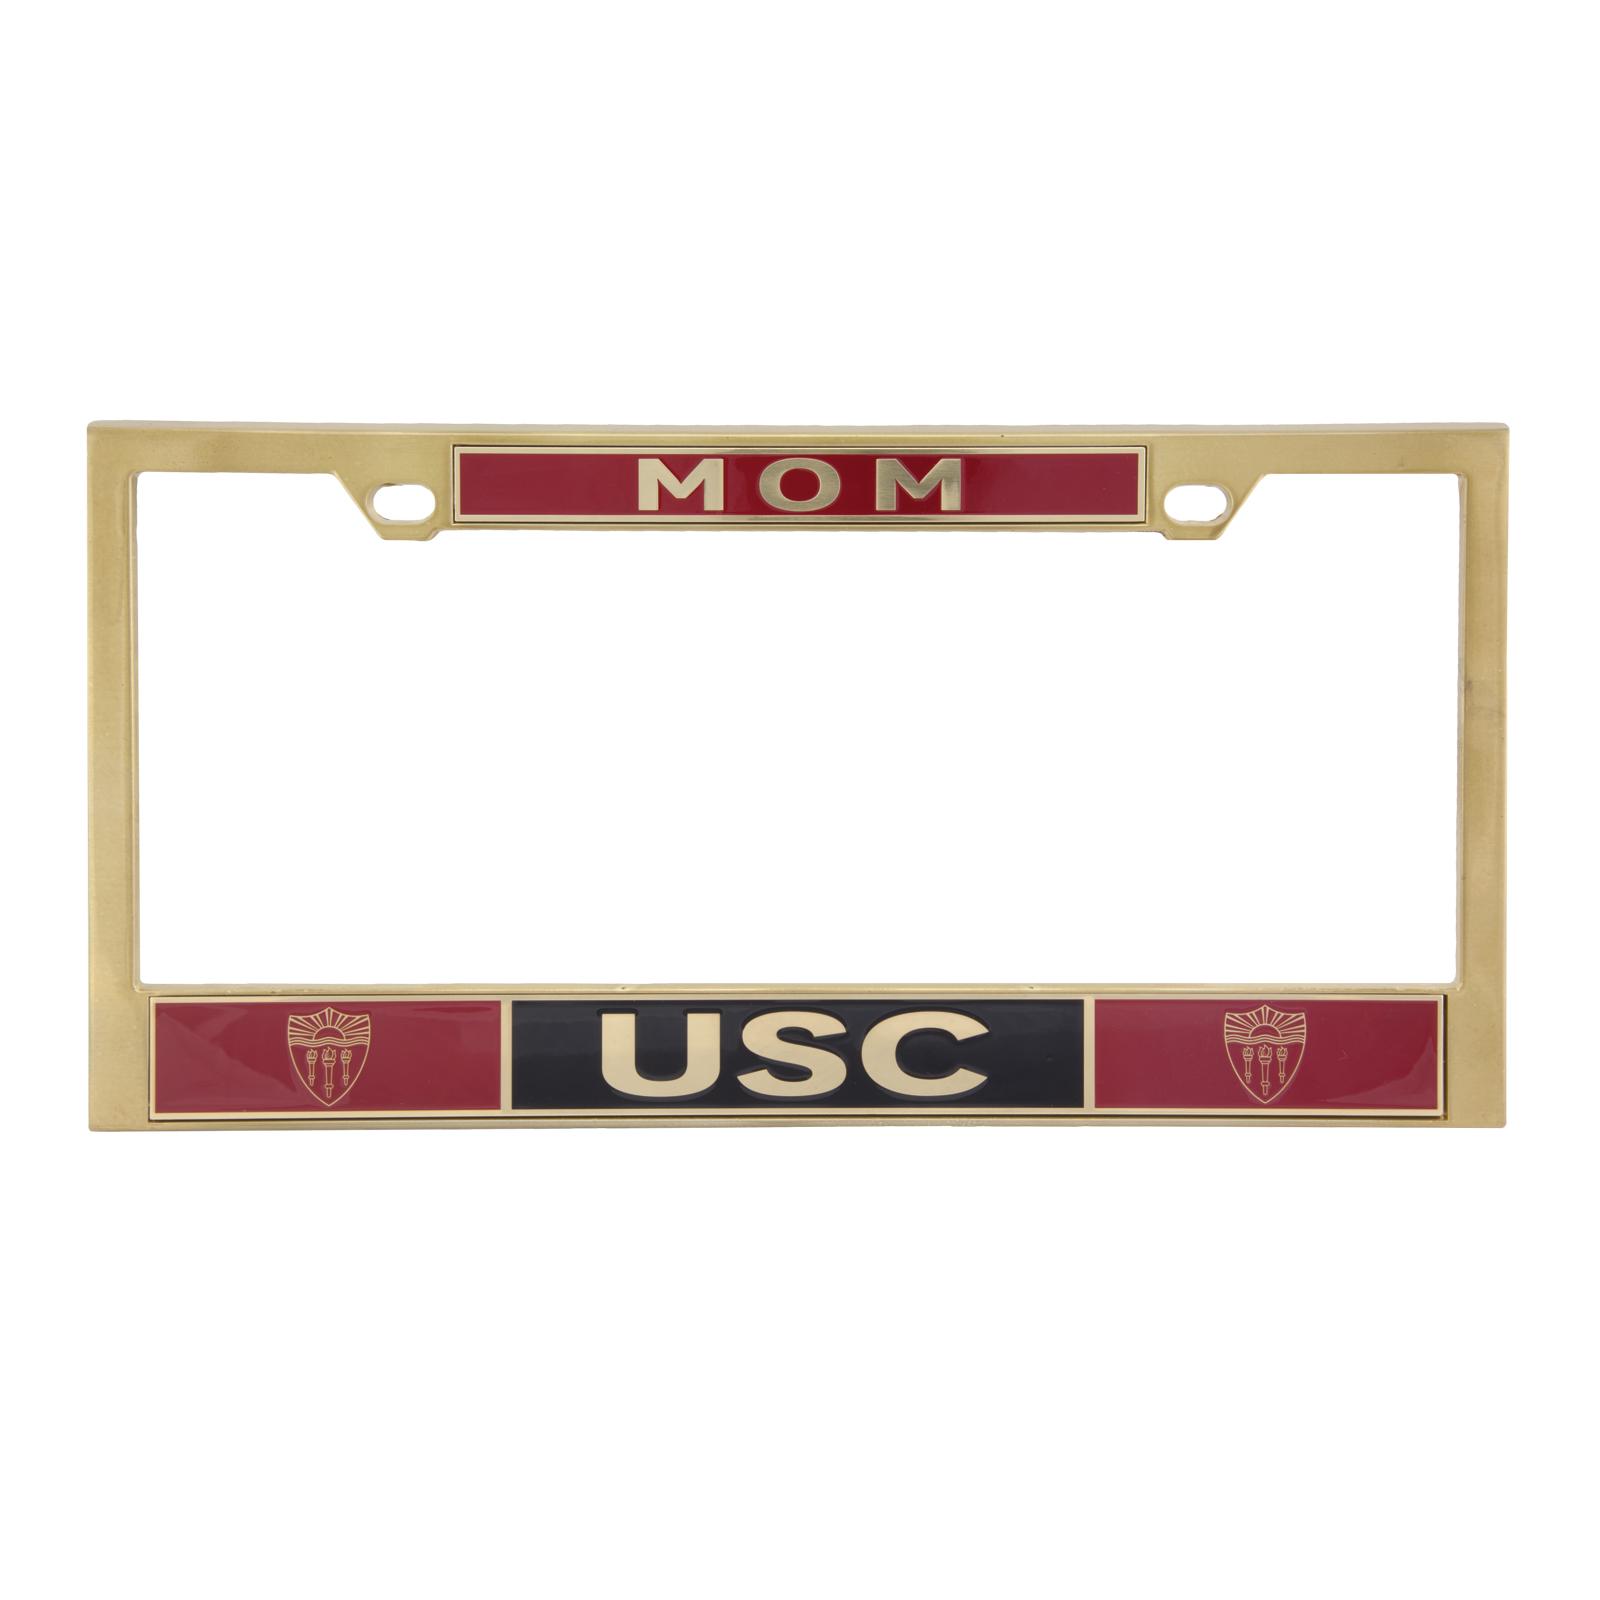 USC Shield Mom License Plate Frame Brass by The U Apparel & Gifts image01